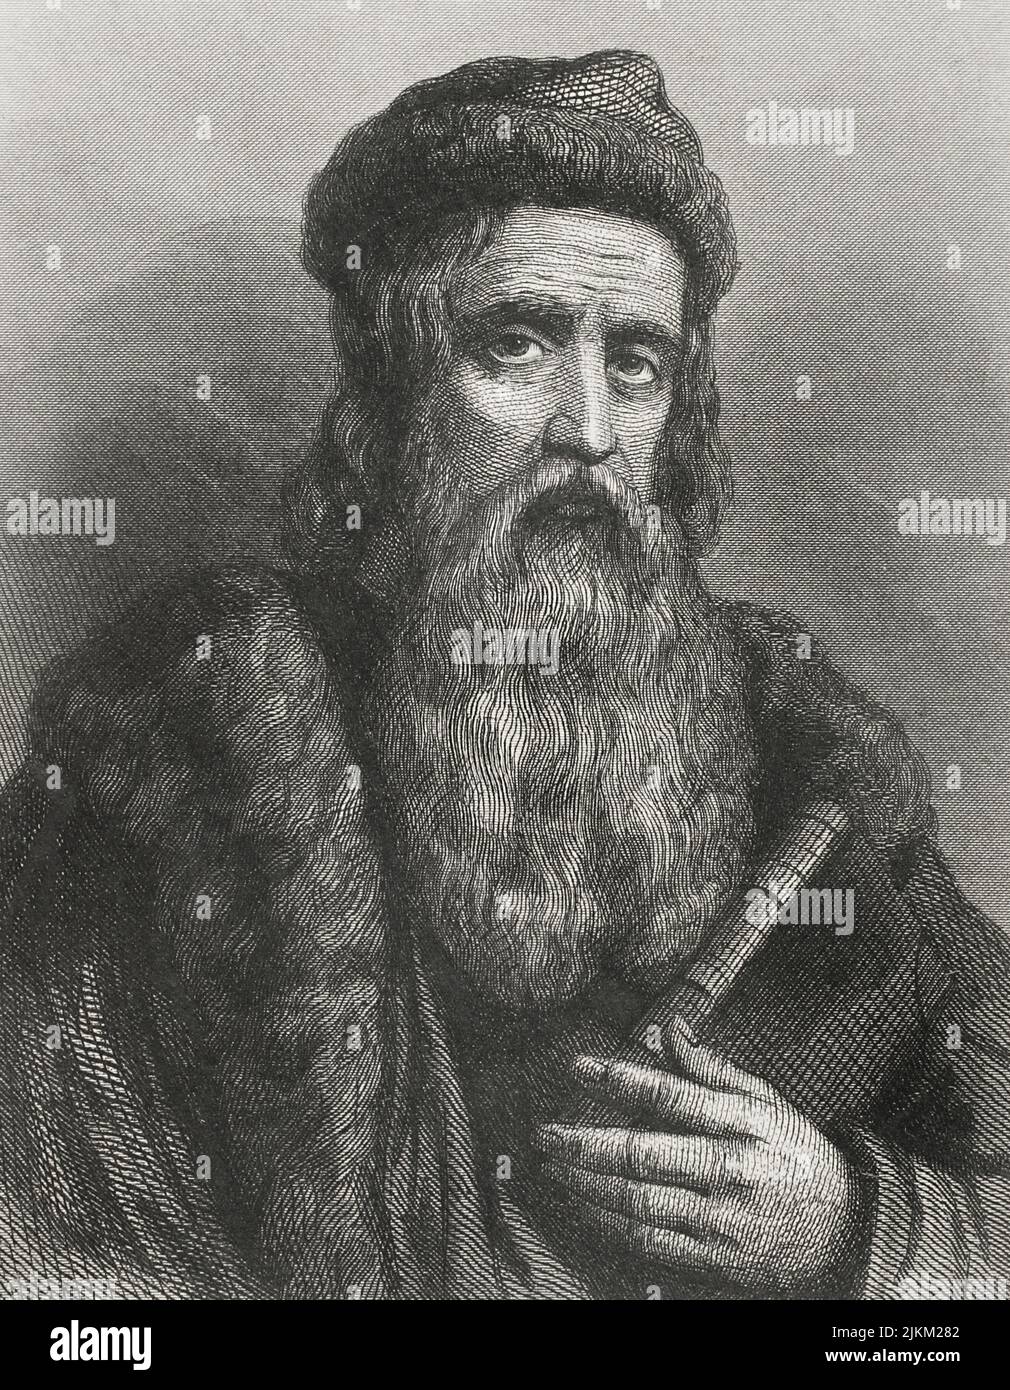 Johannes Gutenberg (ca. 1399-1468). German inventor. Around 1450 he created the first movable type printing press. Portrait. Engraving by Geoffroy. 'Historia Universal', by César Cantú. Volume IV, 1856. Stock Photo